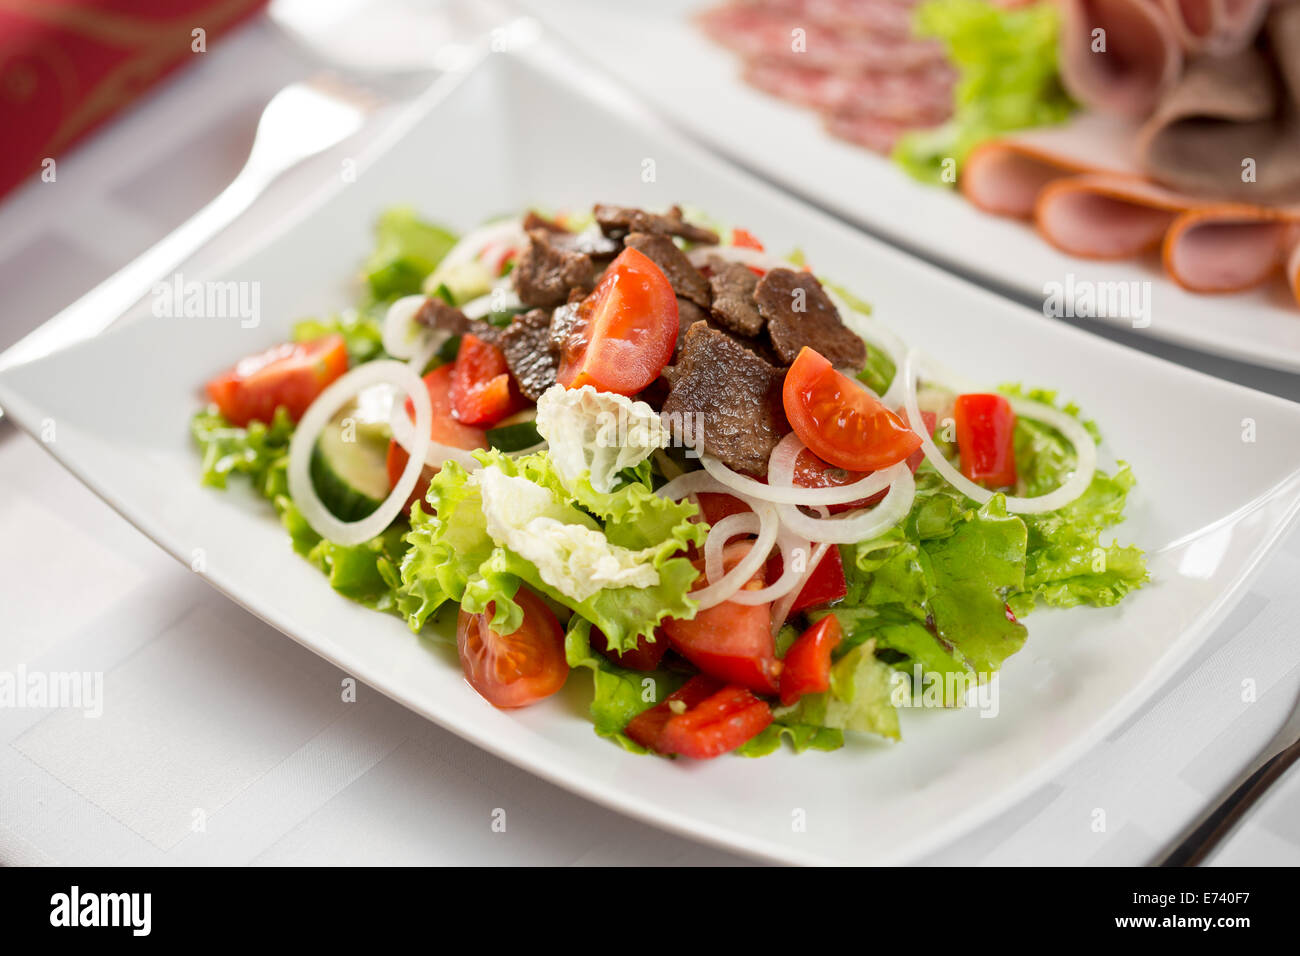 Vegetable salad with beef meat Stock Photo